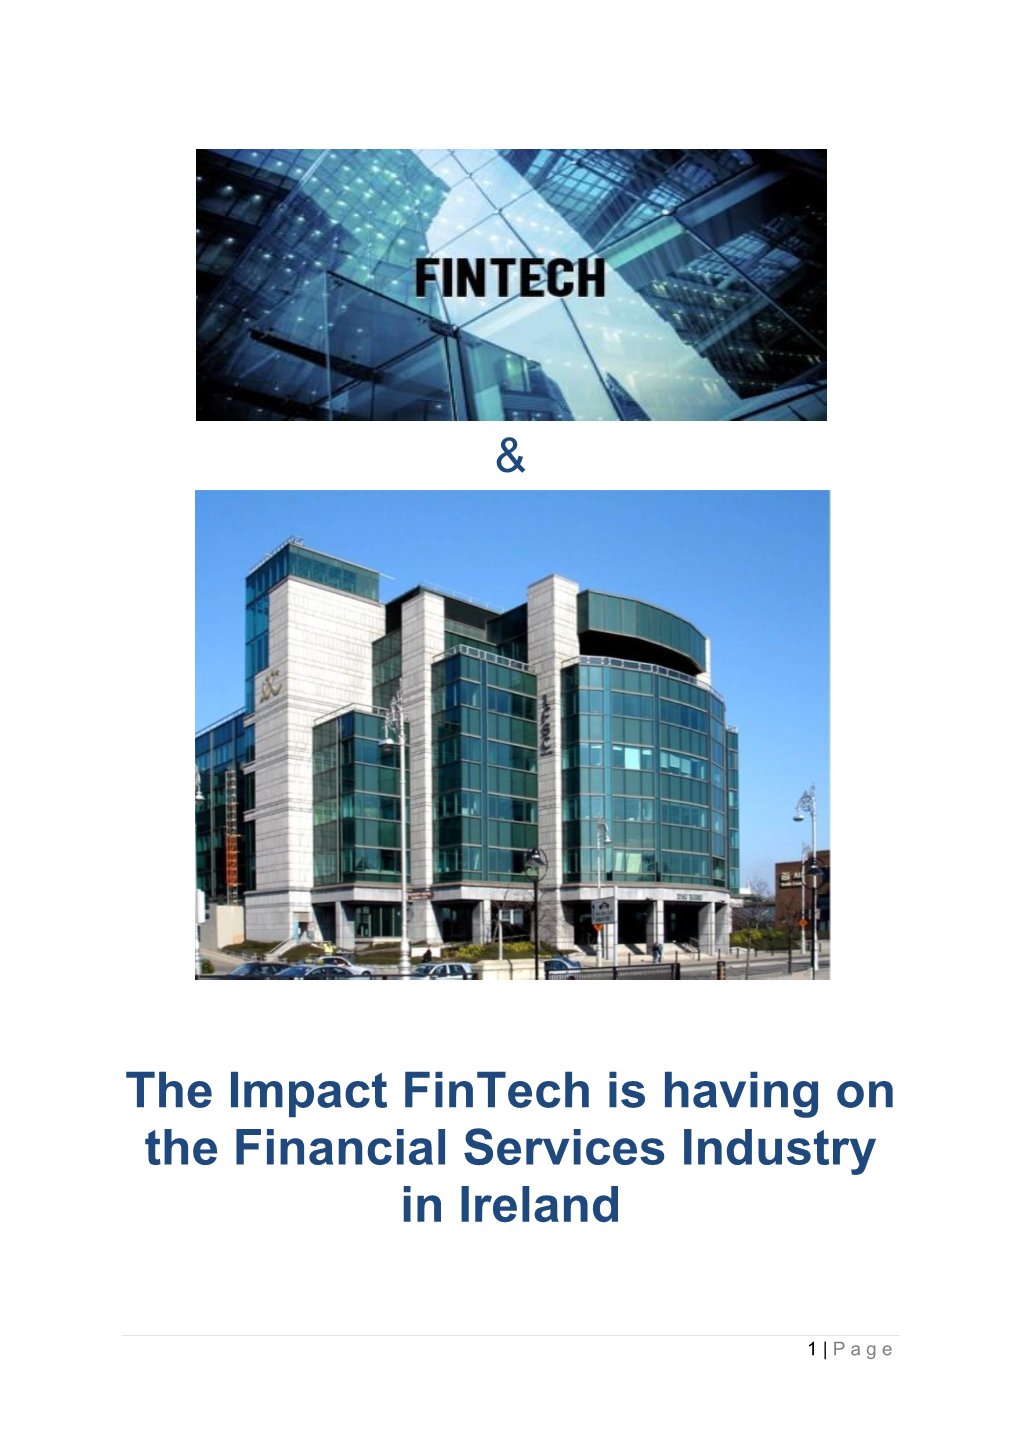 The Impact Fintech Is Having on the Financial Services Industry in Ireland